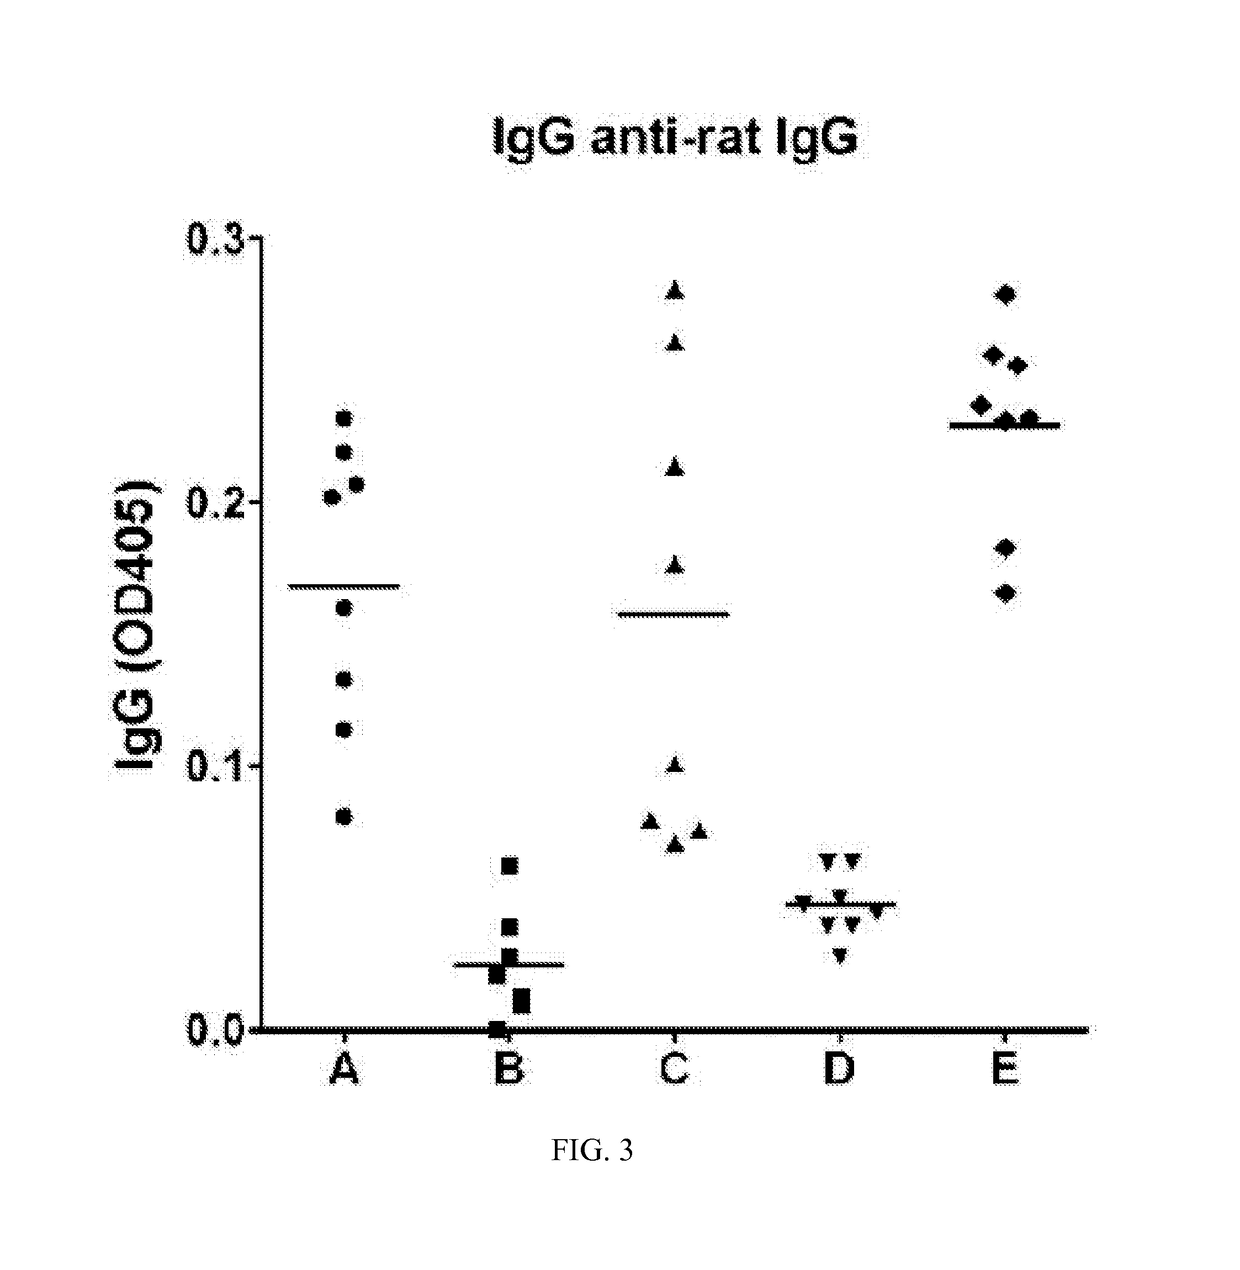 Immunogenic compositions and reagents for preparing